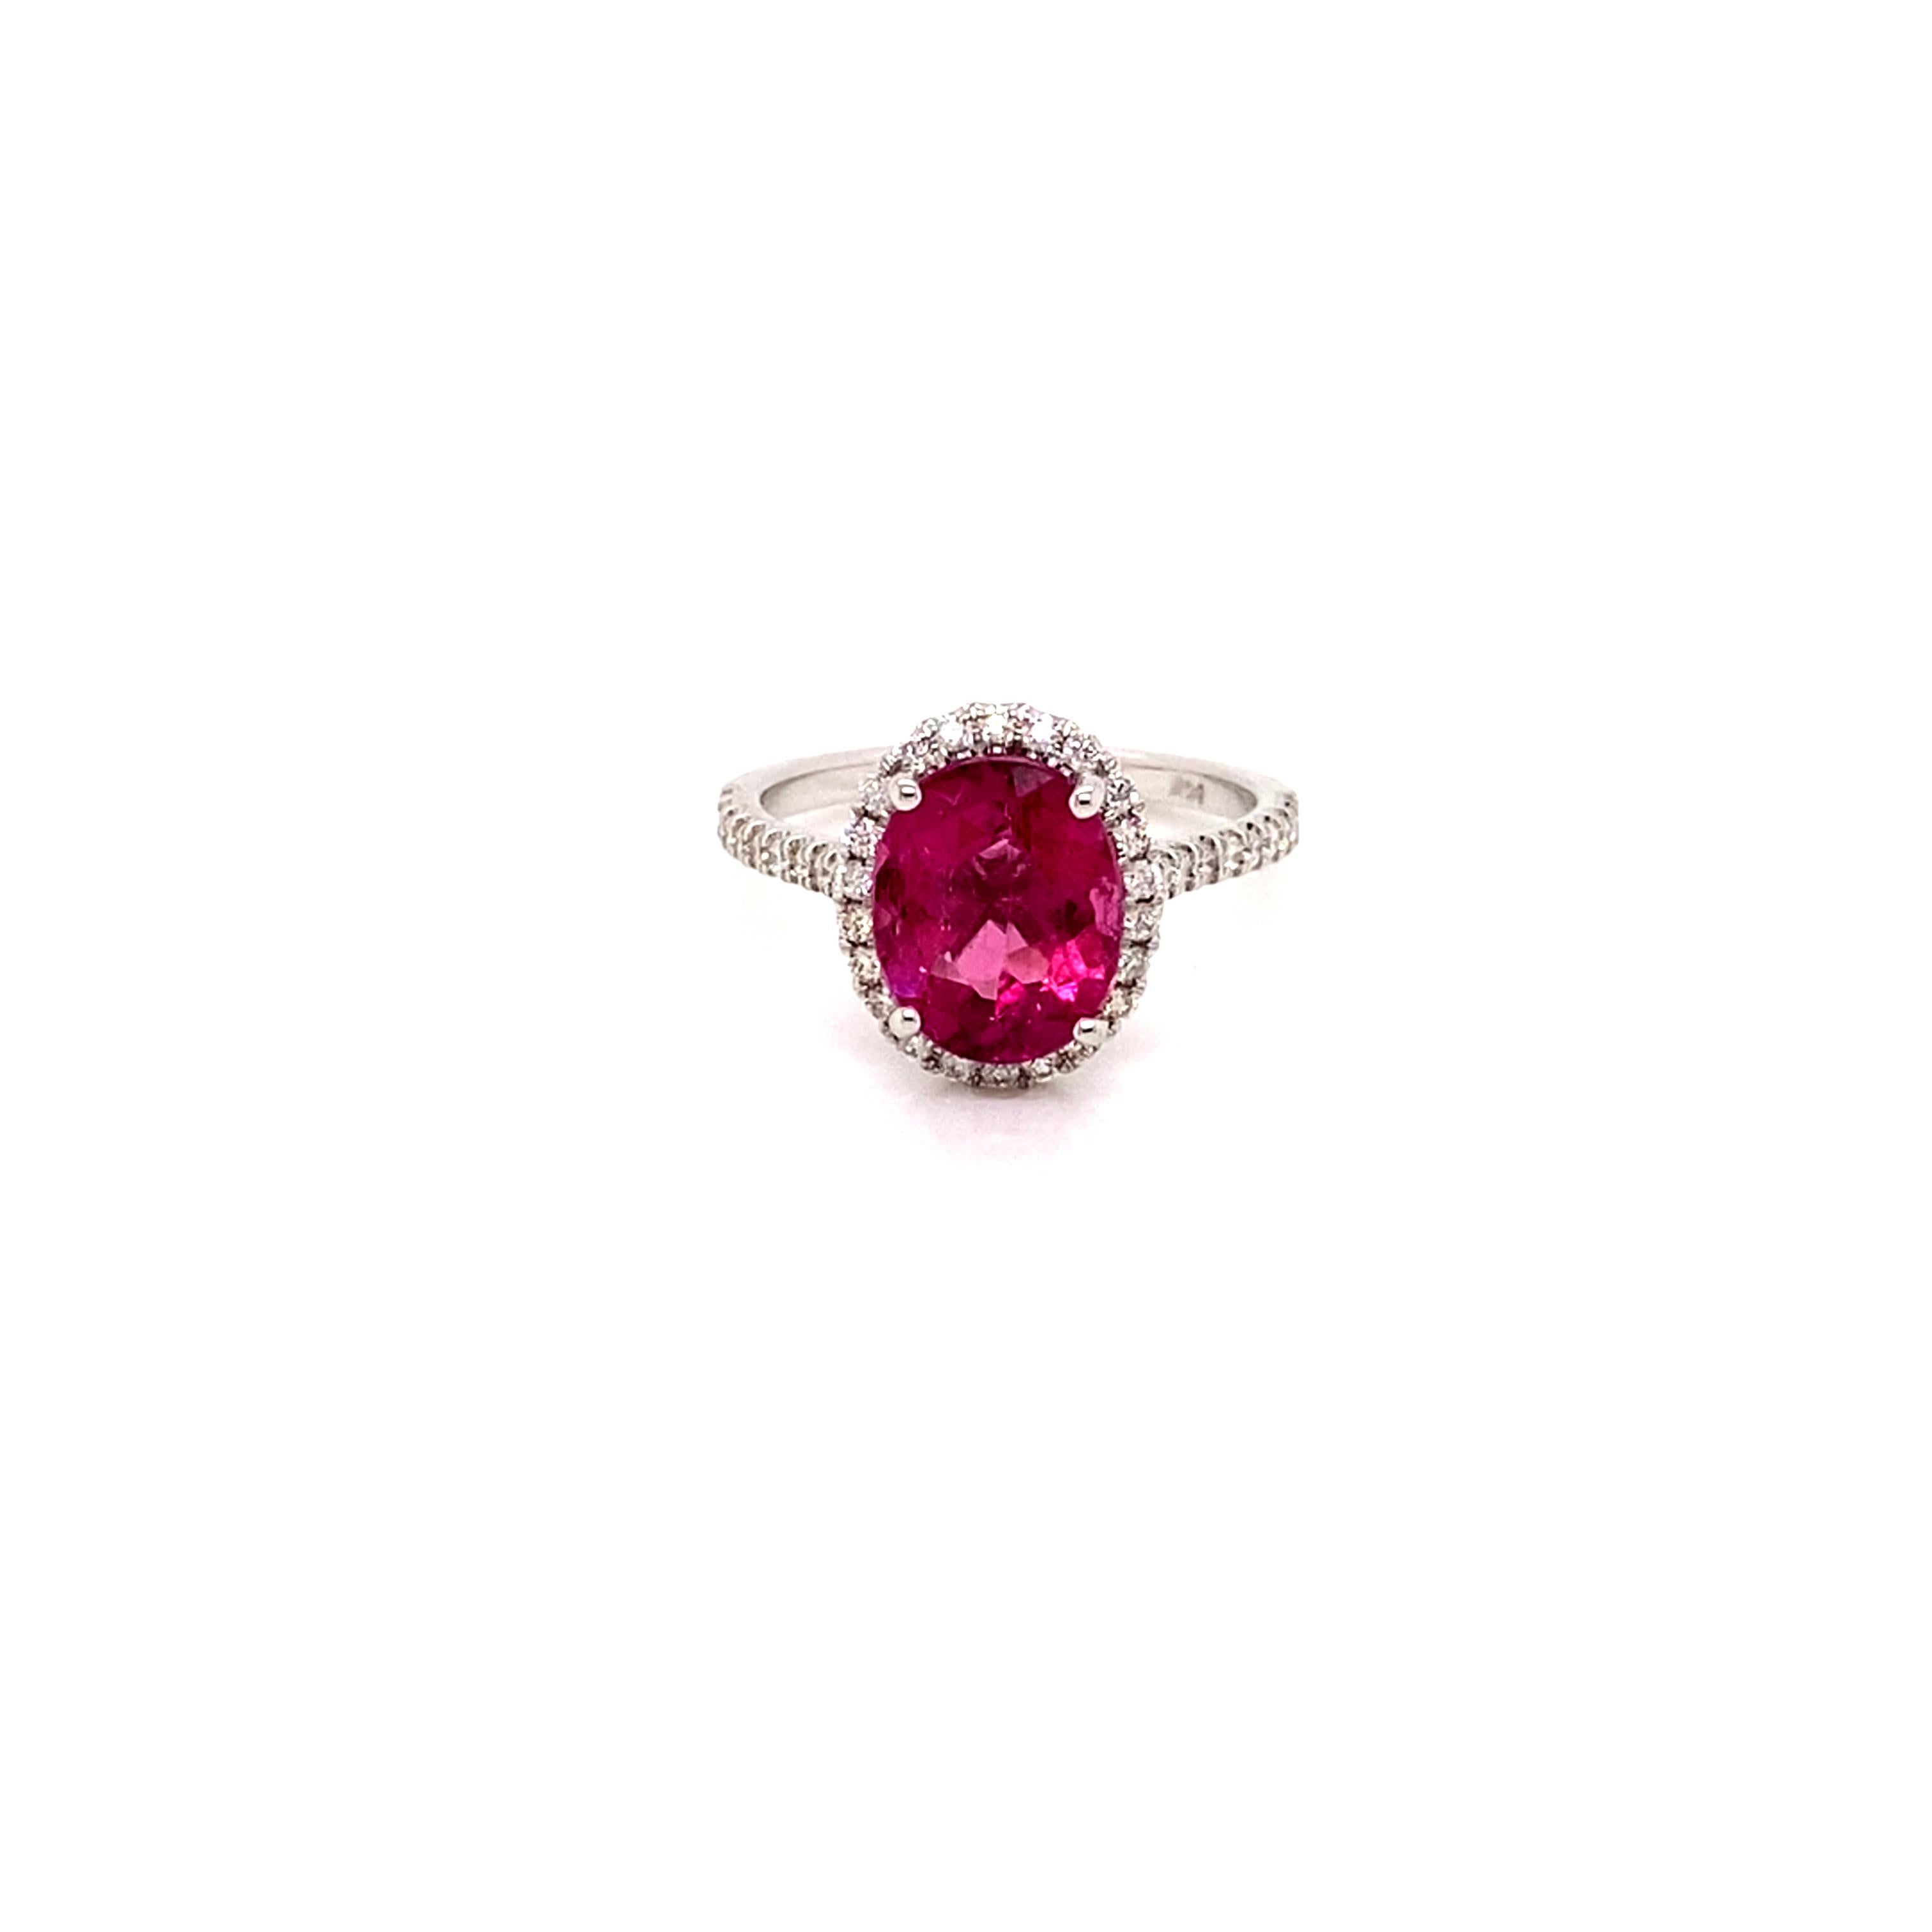 A vibrant pink 3.26 carat Oval  Pink Tourmaline with a scintillating halo of brilliant diamonds on a diamond band make quite the dazzling statement.
This stunning tourmaline was hand selected for its brilliance, clarity, and  youthful vibrant pink